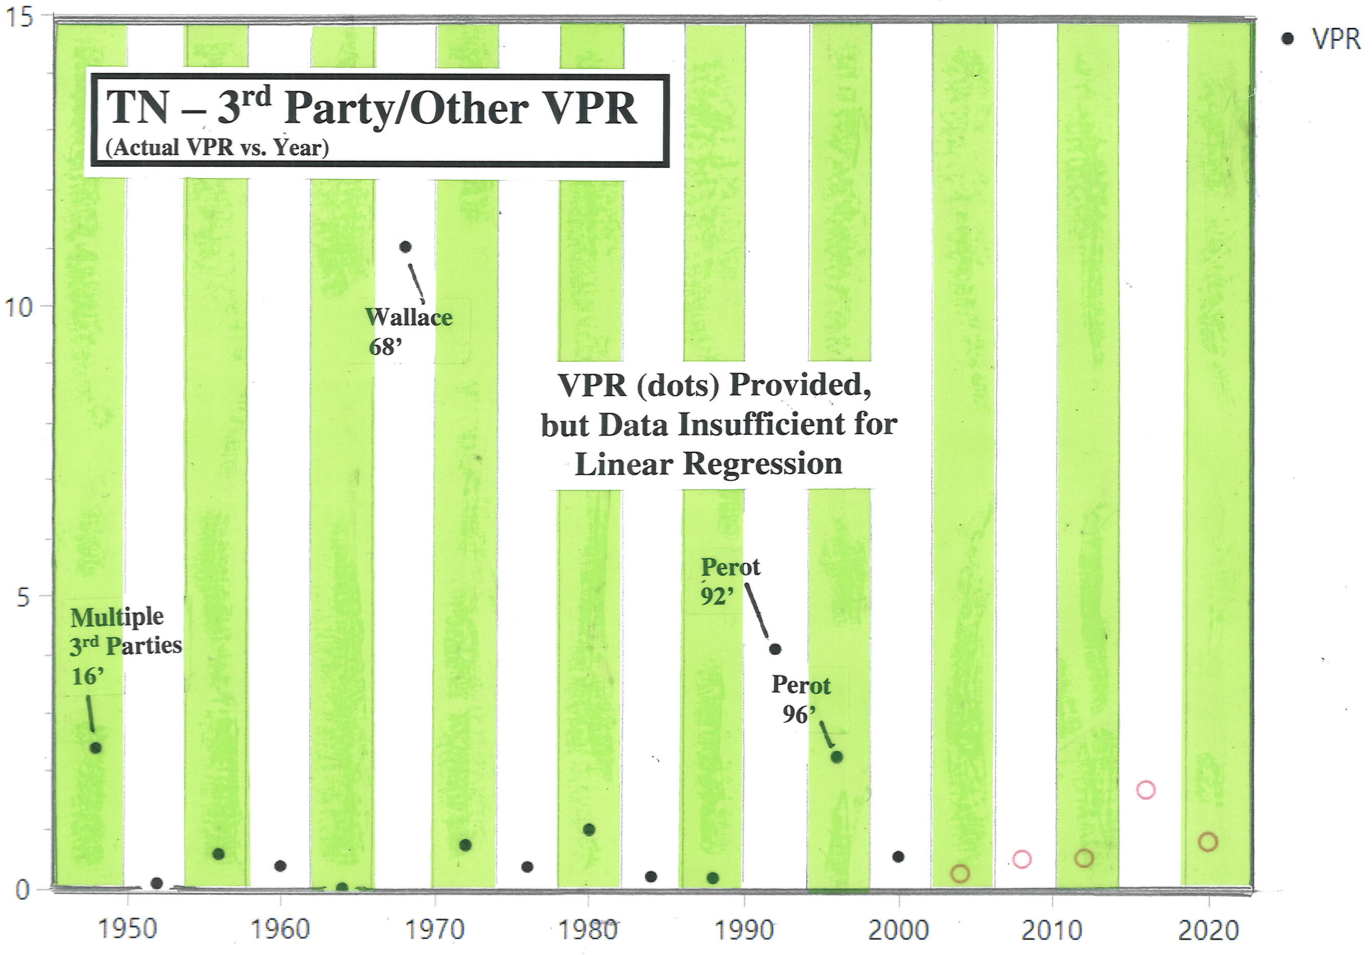 TN – 3rd Party/Other VPR